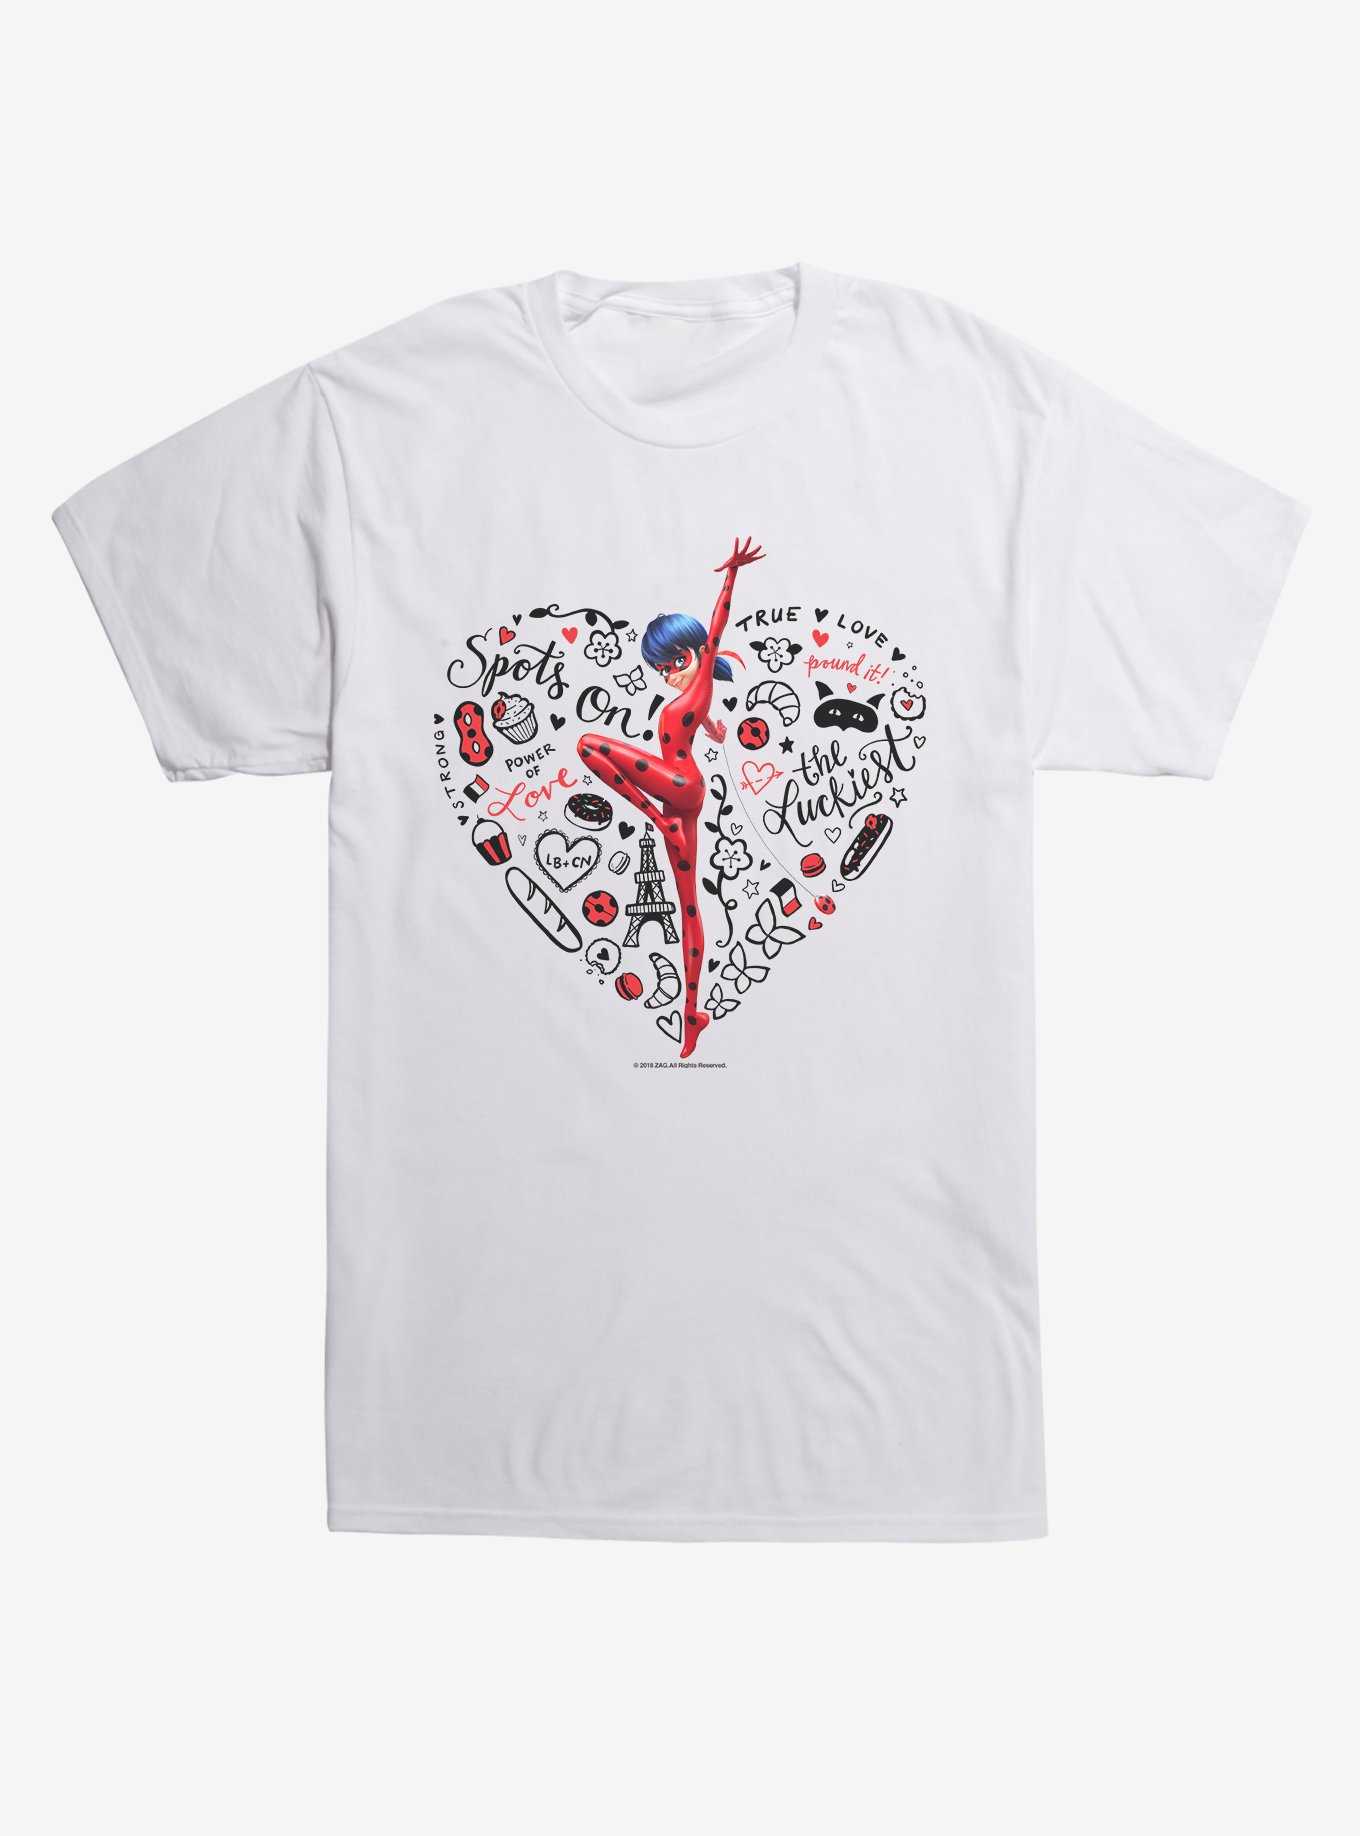 Extra Soft Miraculous: Tales of Ladybug & Cat Noir Heart Collage T-Shirt, , hi-res